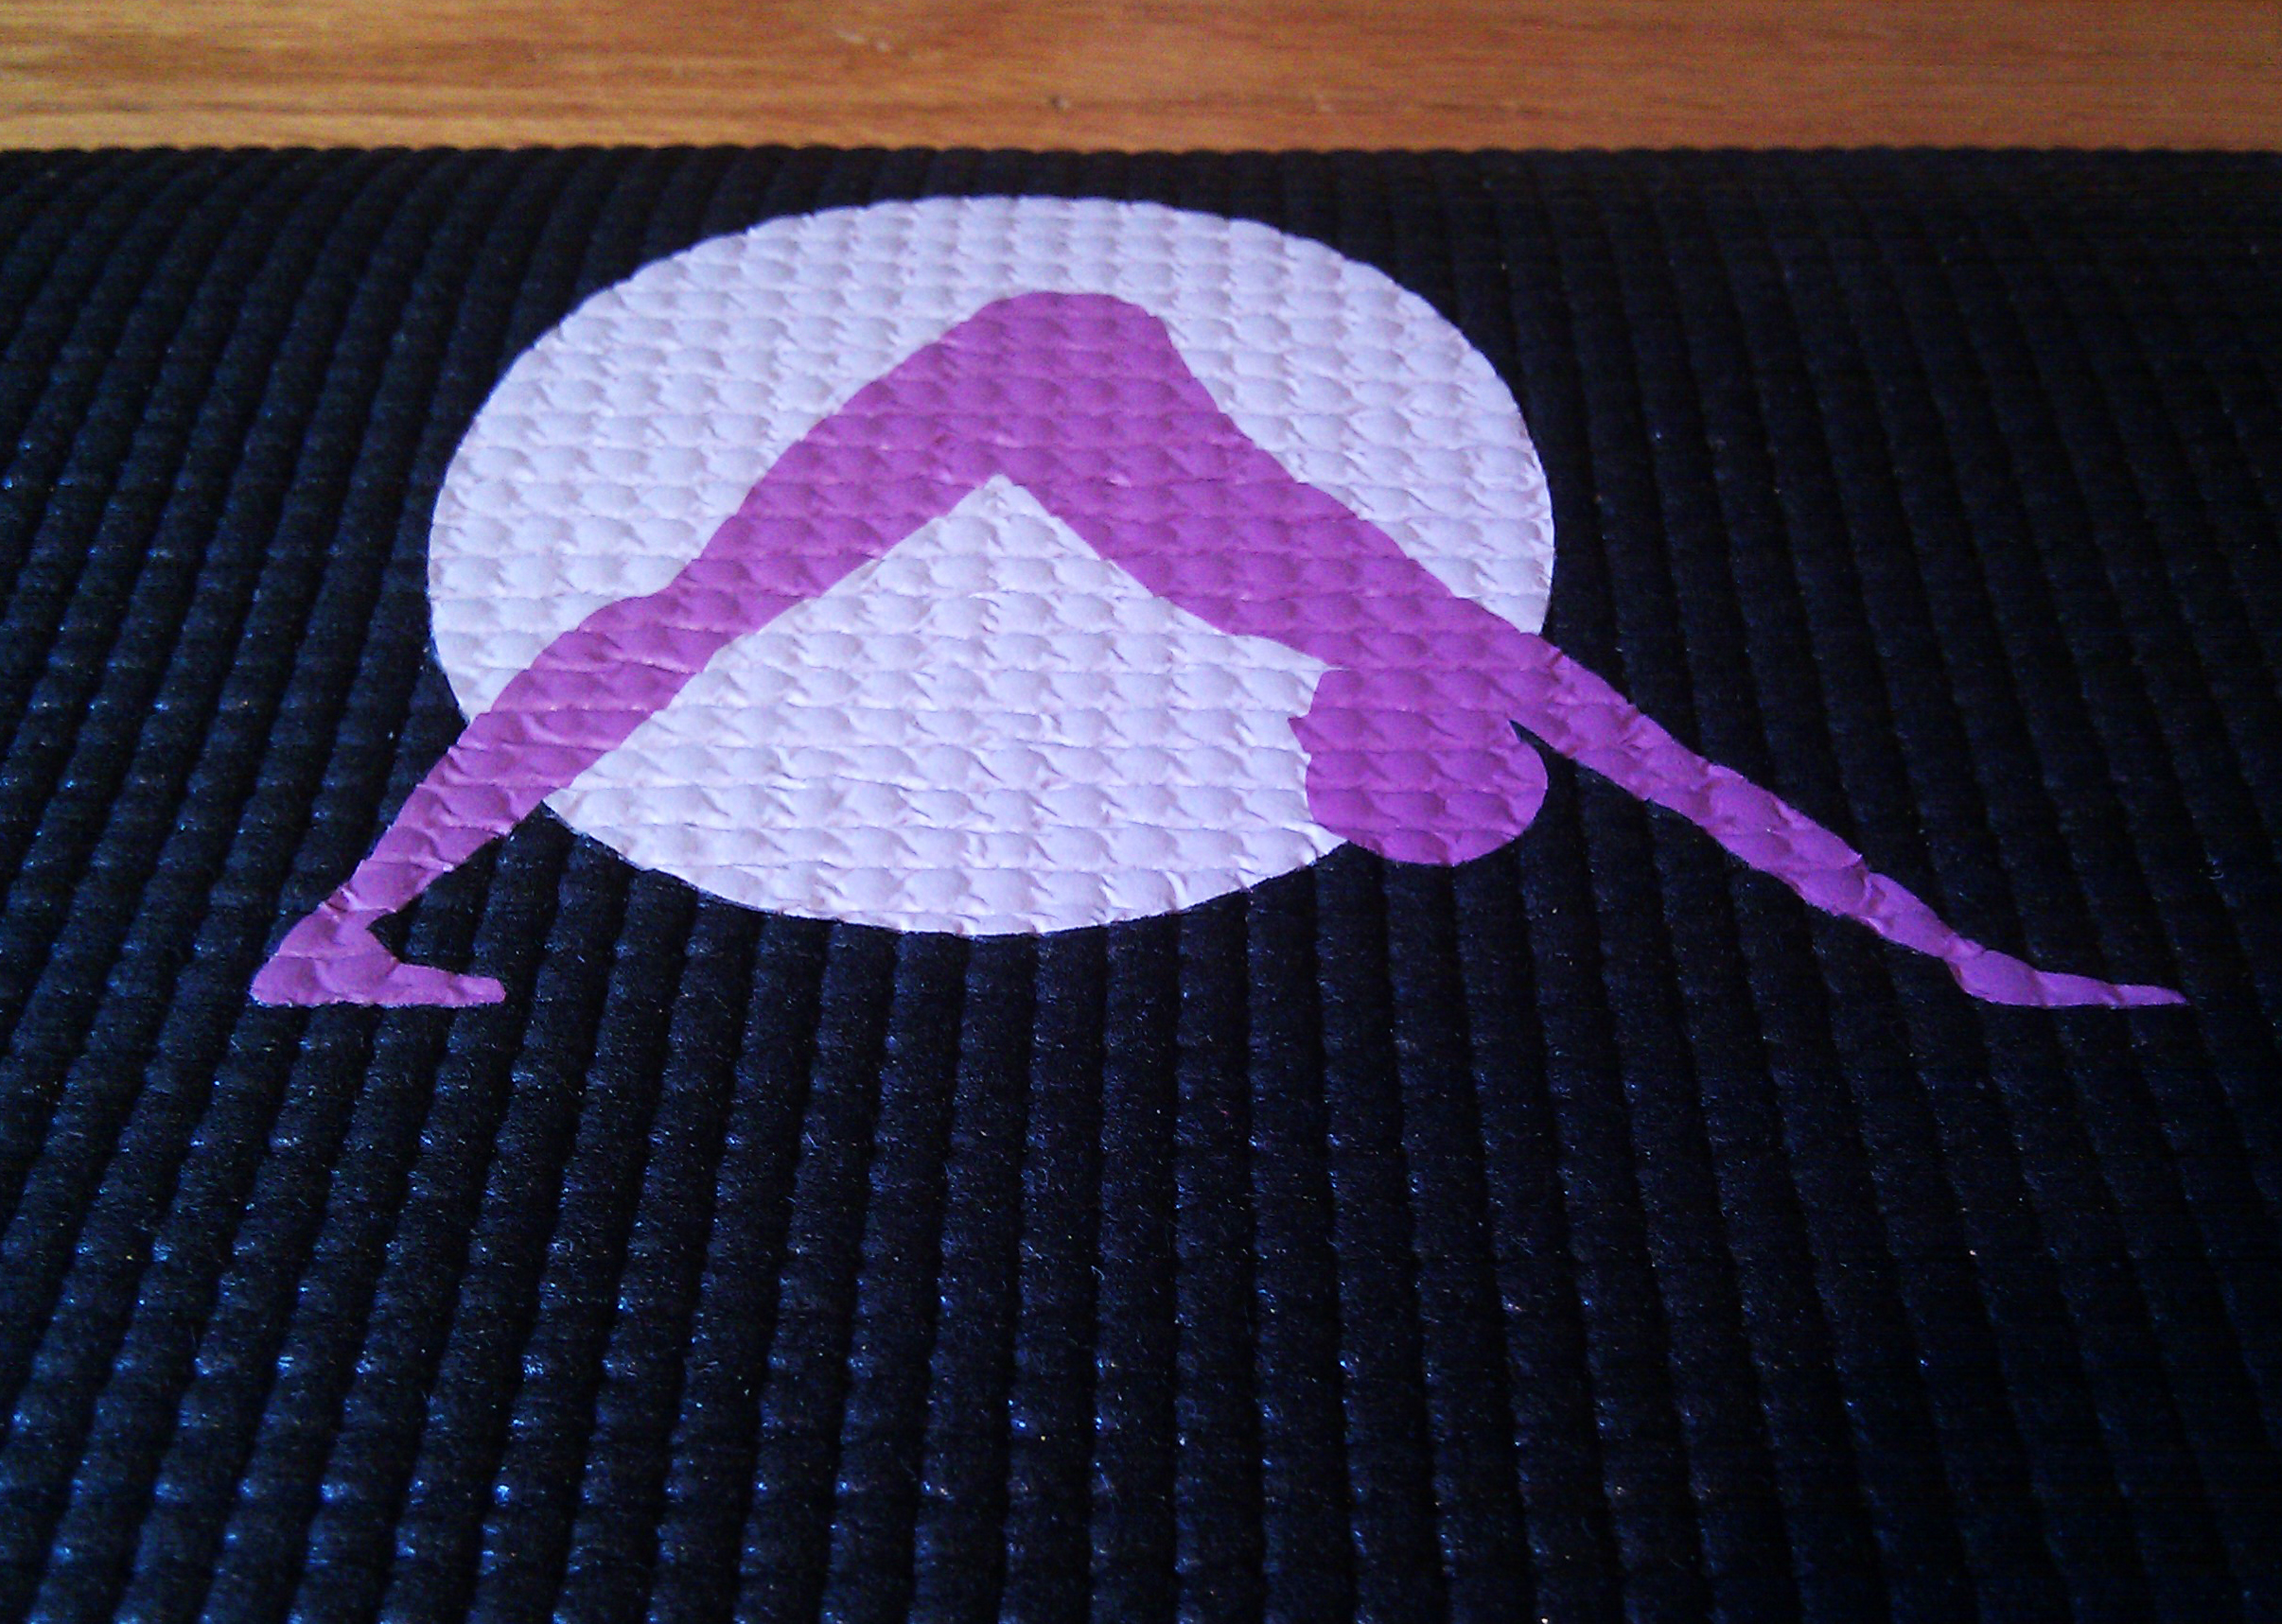  AURORAE Classic/Printed Extra Thick and Long Yoga Mat. Slip  Free Rosin included : Sports & Outdoors